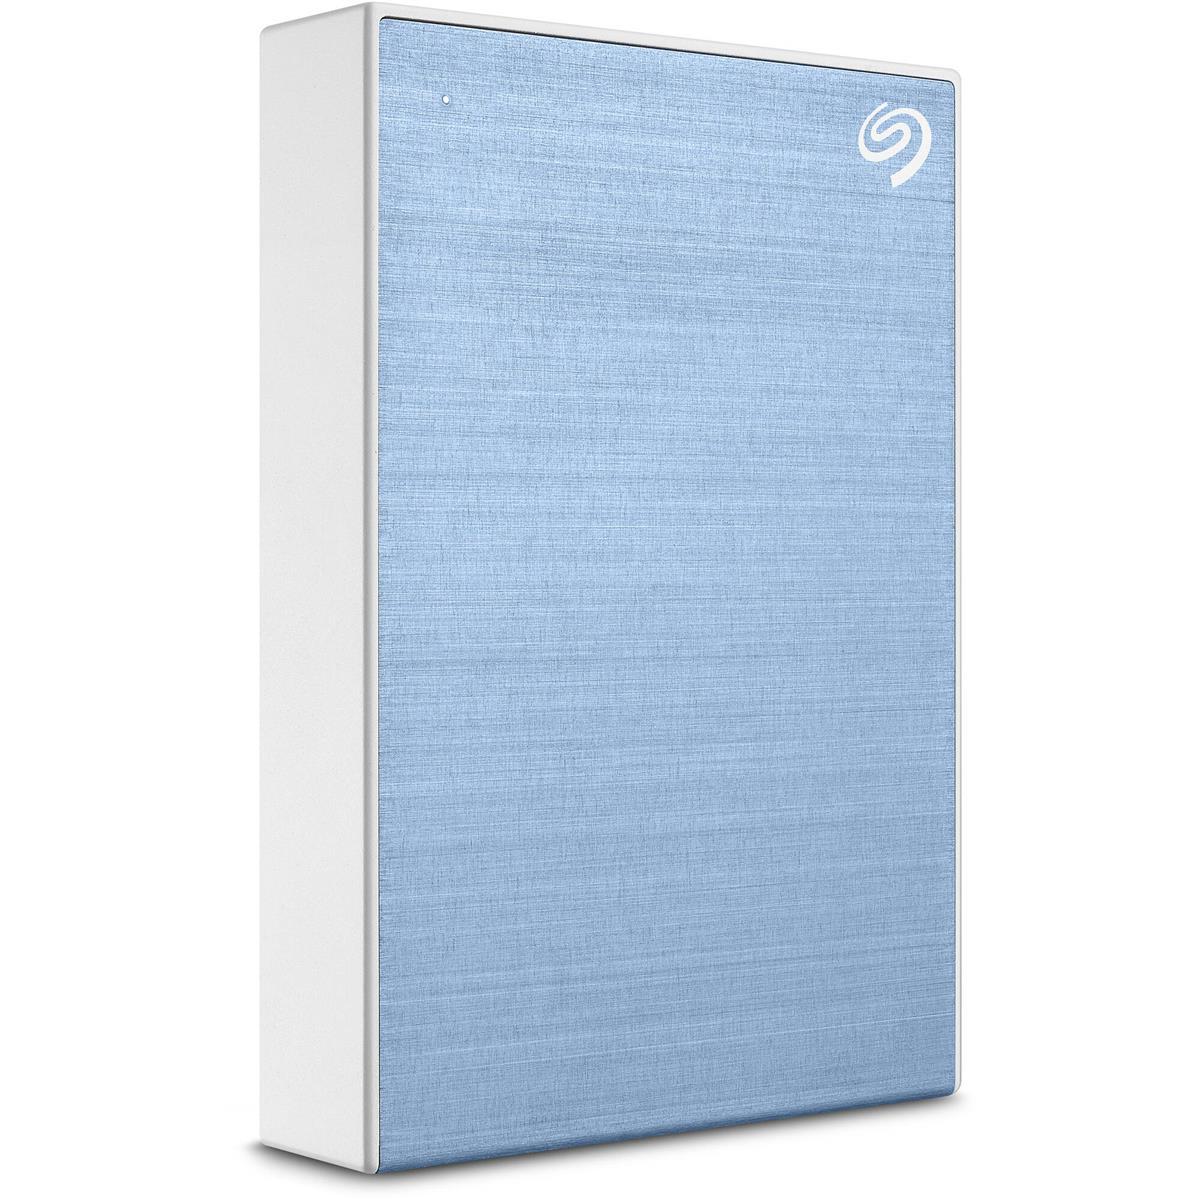 Ổ cứng di động Seagate One Touch 5TB slide image 0